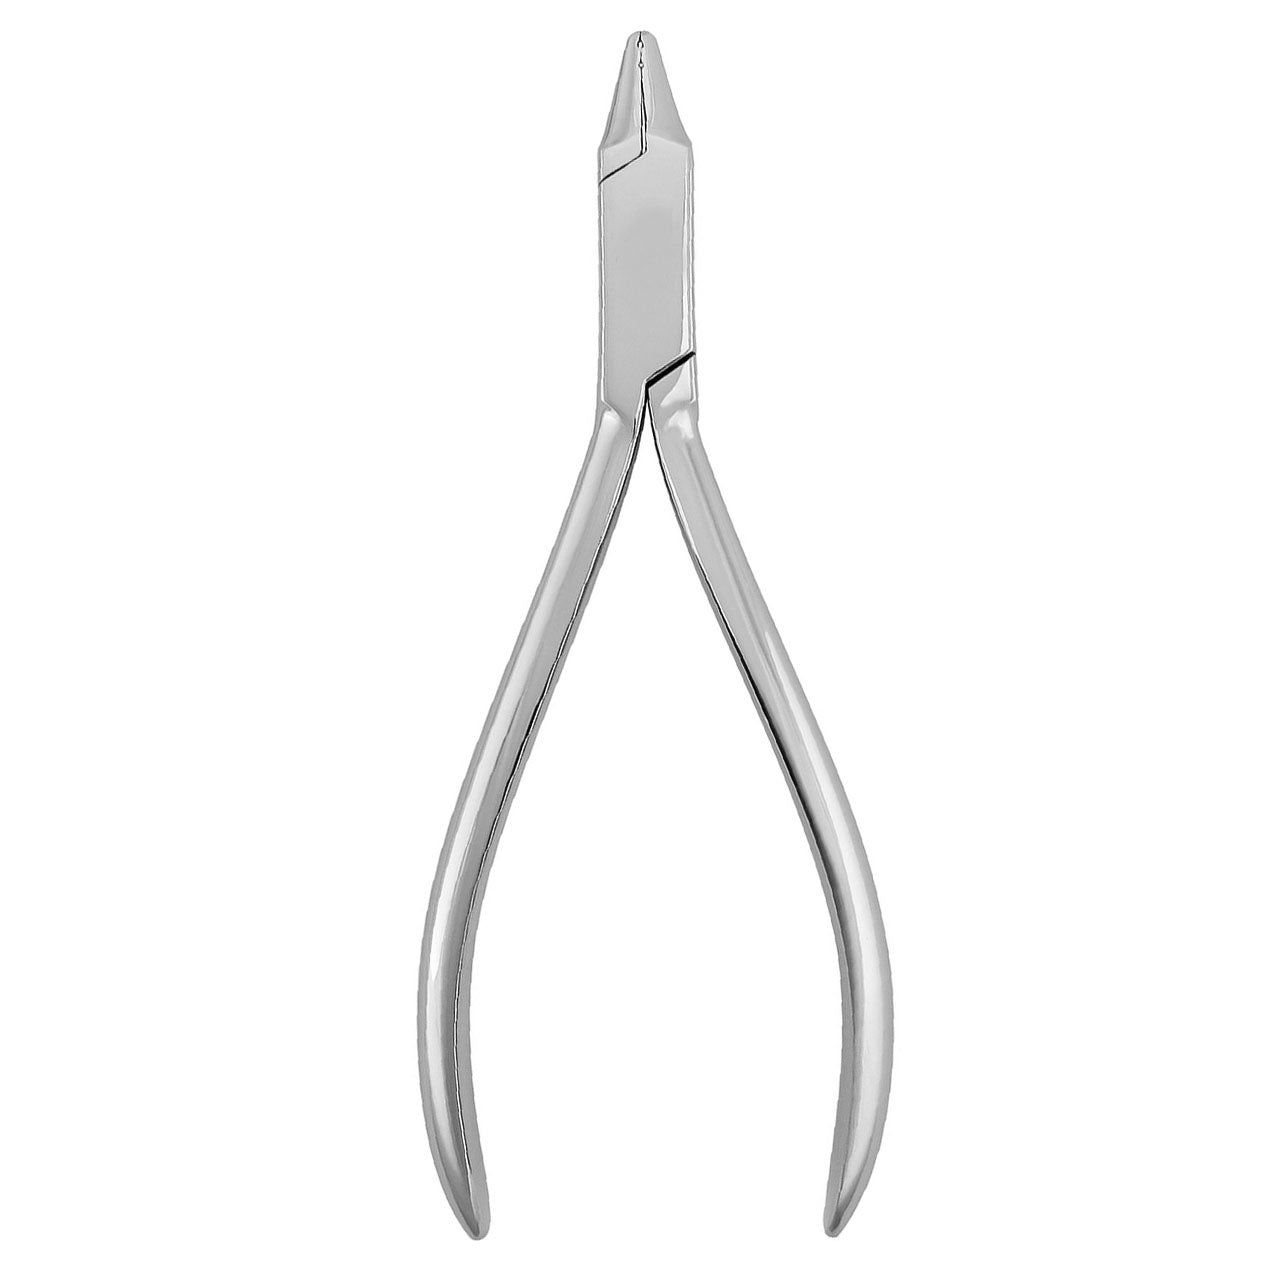 MILTEX Wire Bending Pliers, Knotched Jaws, Length= 5 (127 mm). ID# 74-10